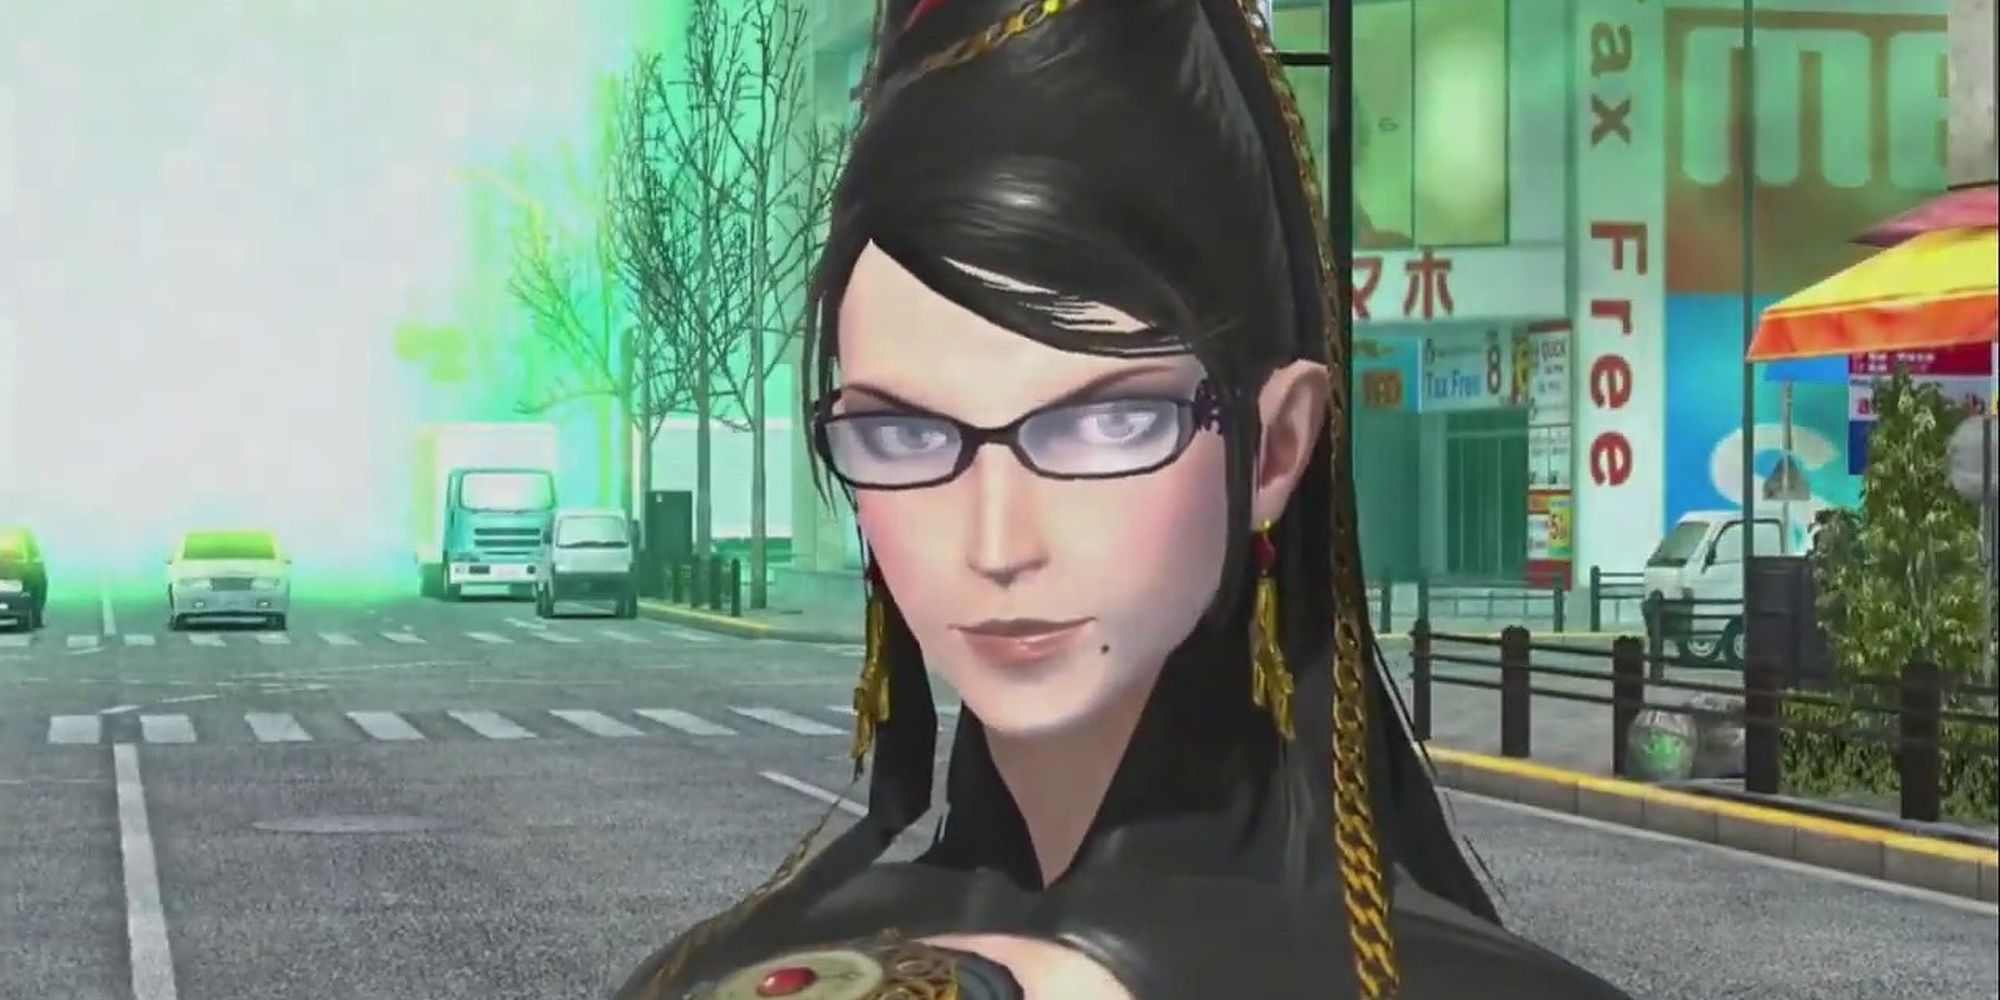 Bayonetta as she appears in an event for Shin Megami Tensei: Liberation Dx2